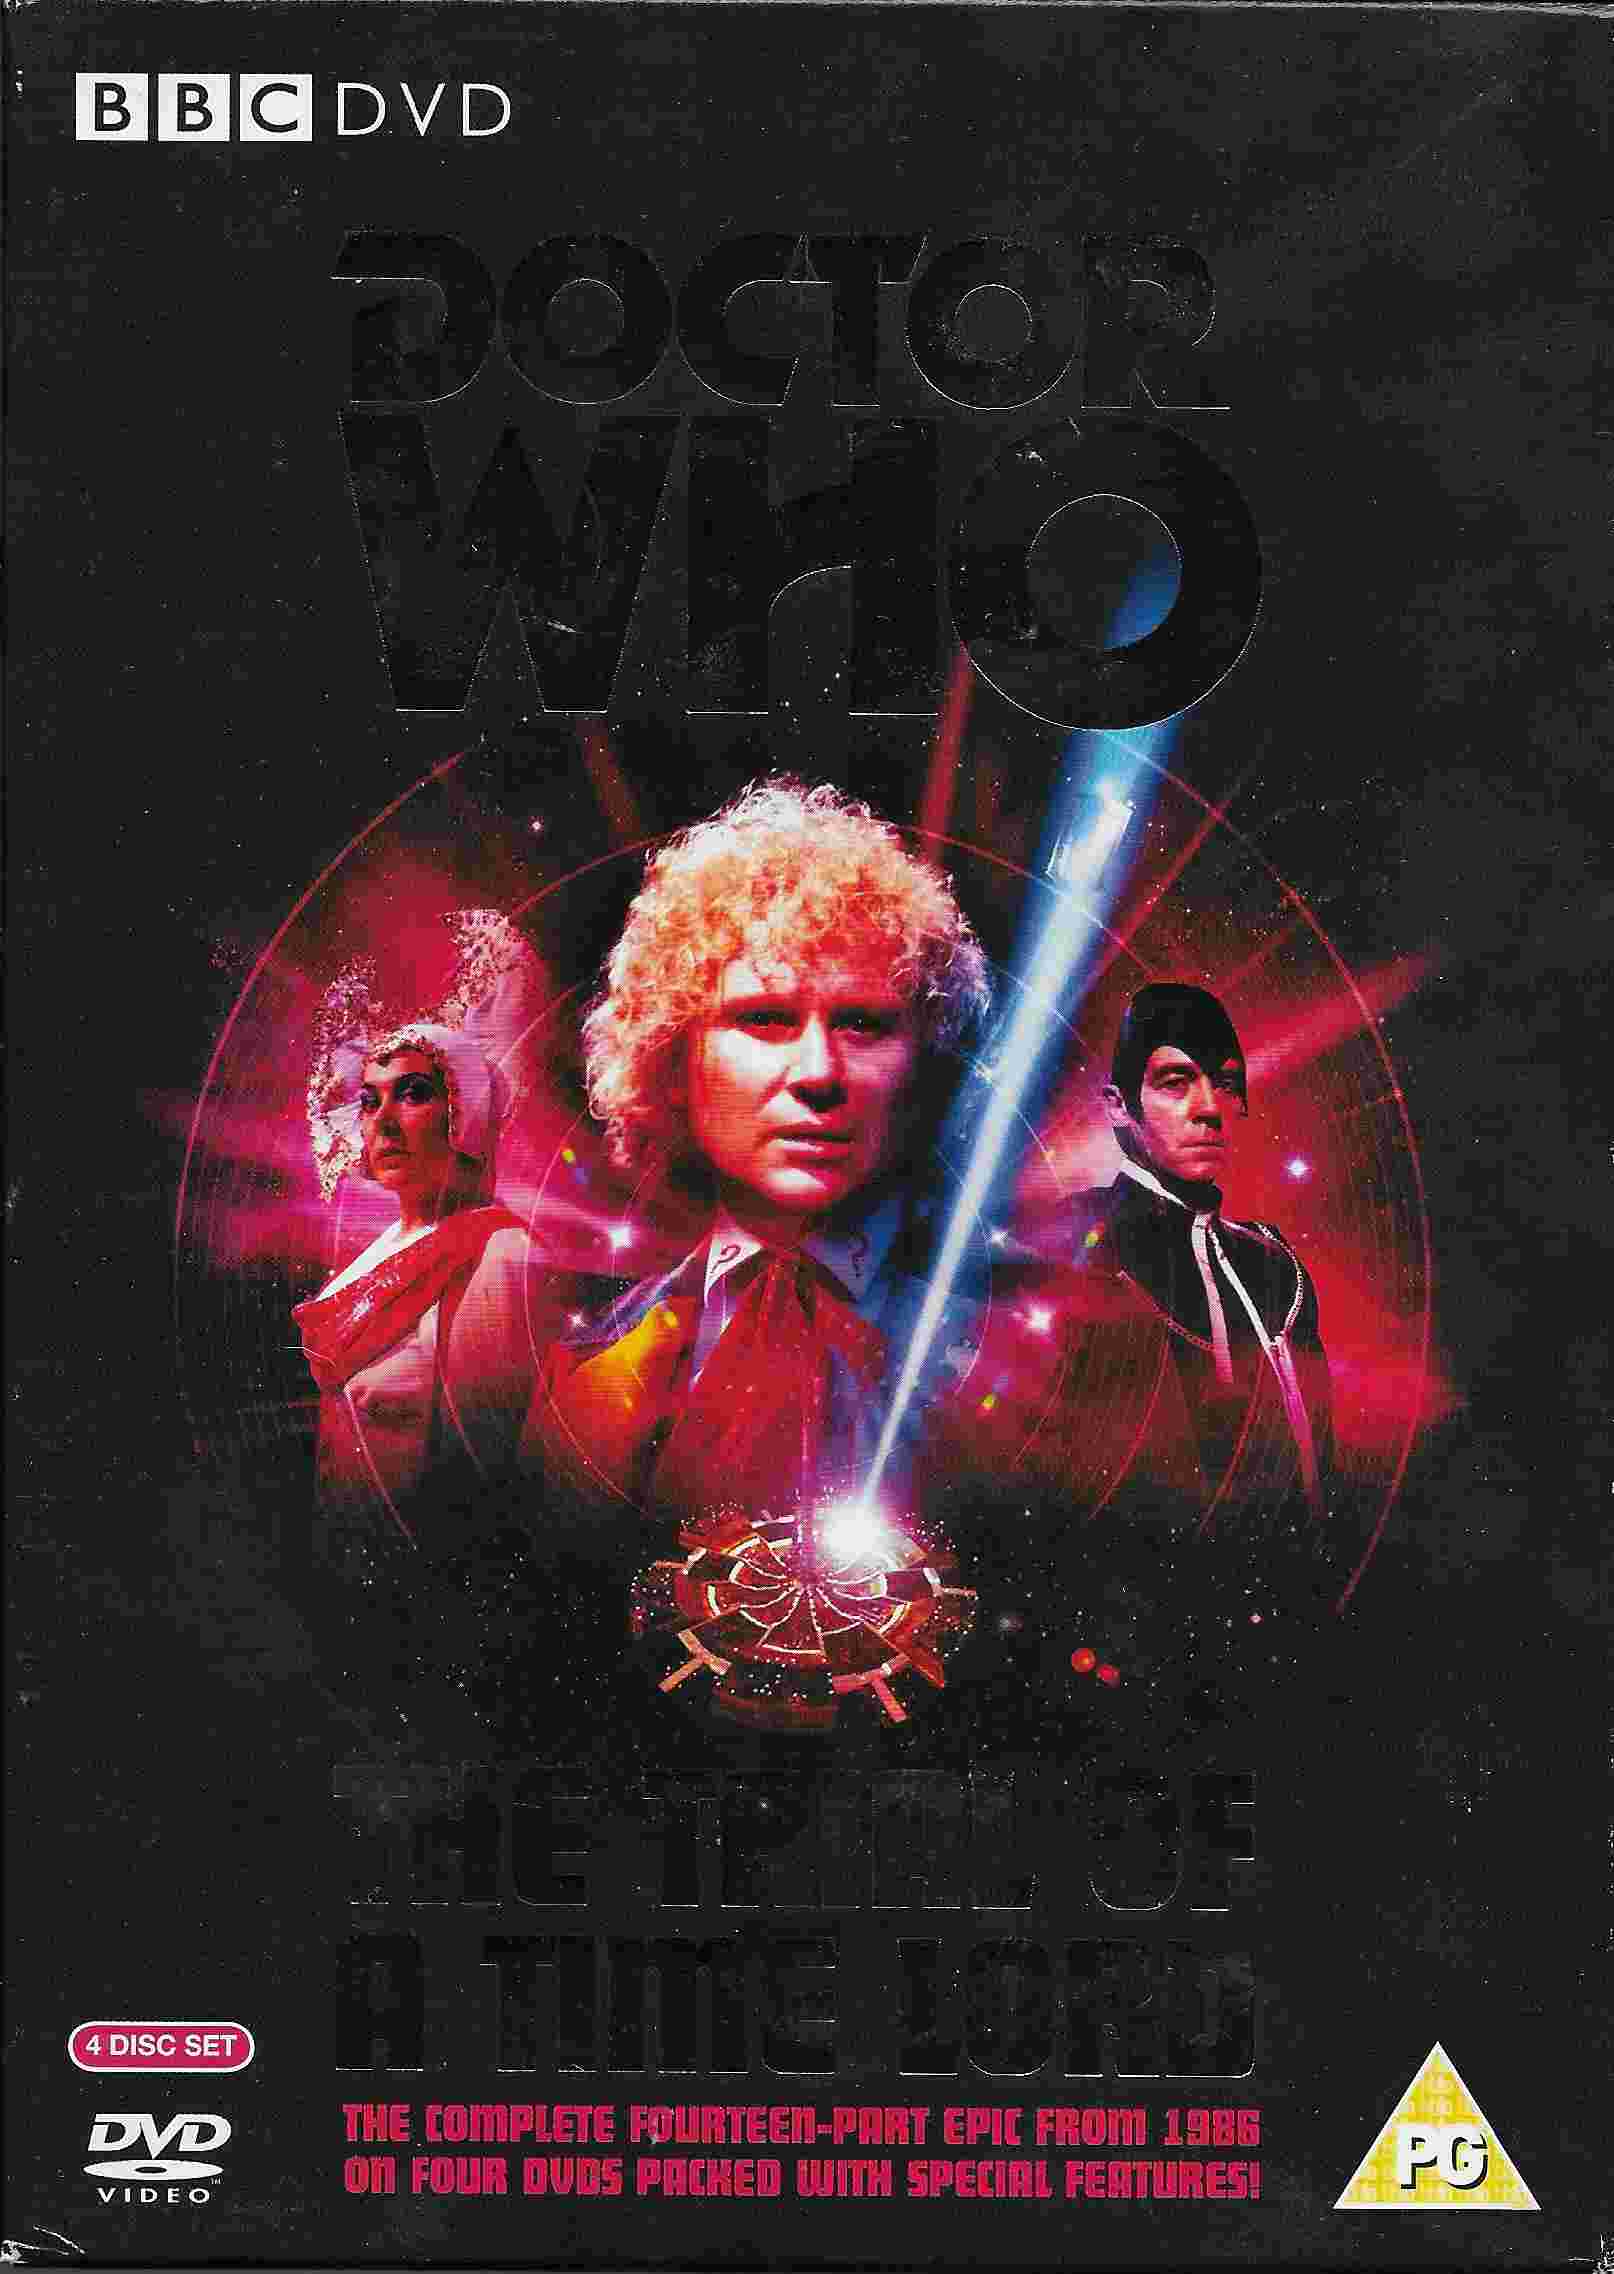 Picture of BBCDVD 2422 Doctor Who - The trial of a Time Lord by artist Robert Holmes / Pip and Jane Baker from the BBC records and Tapes library